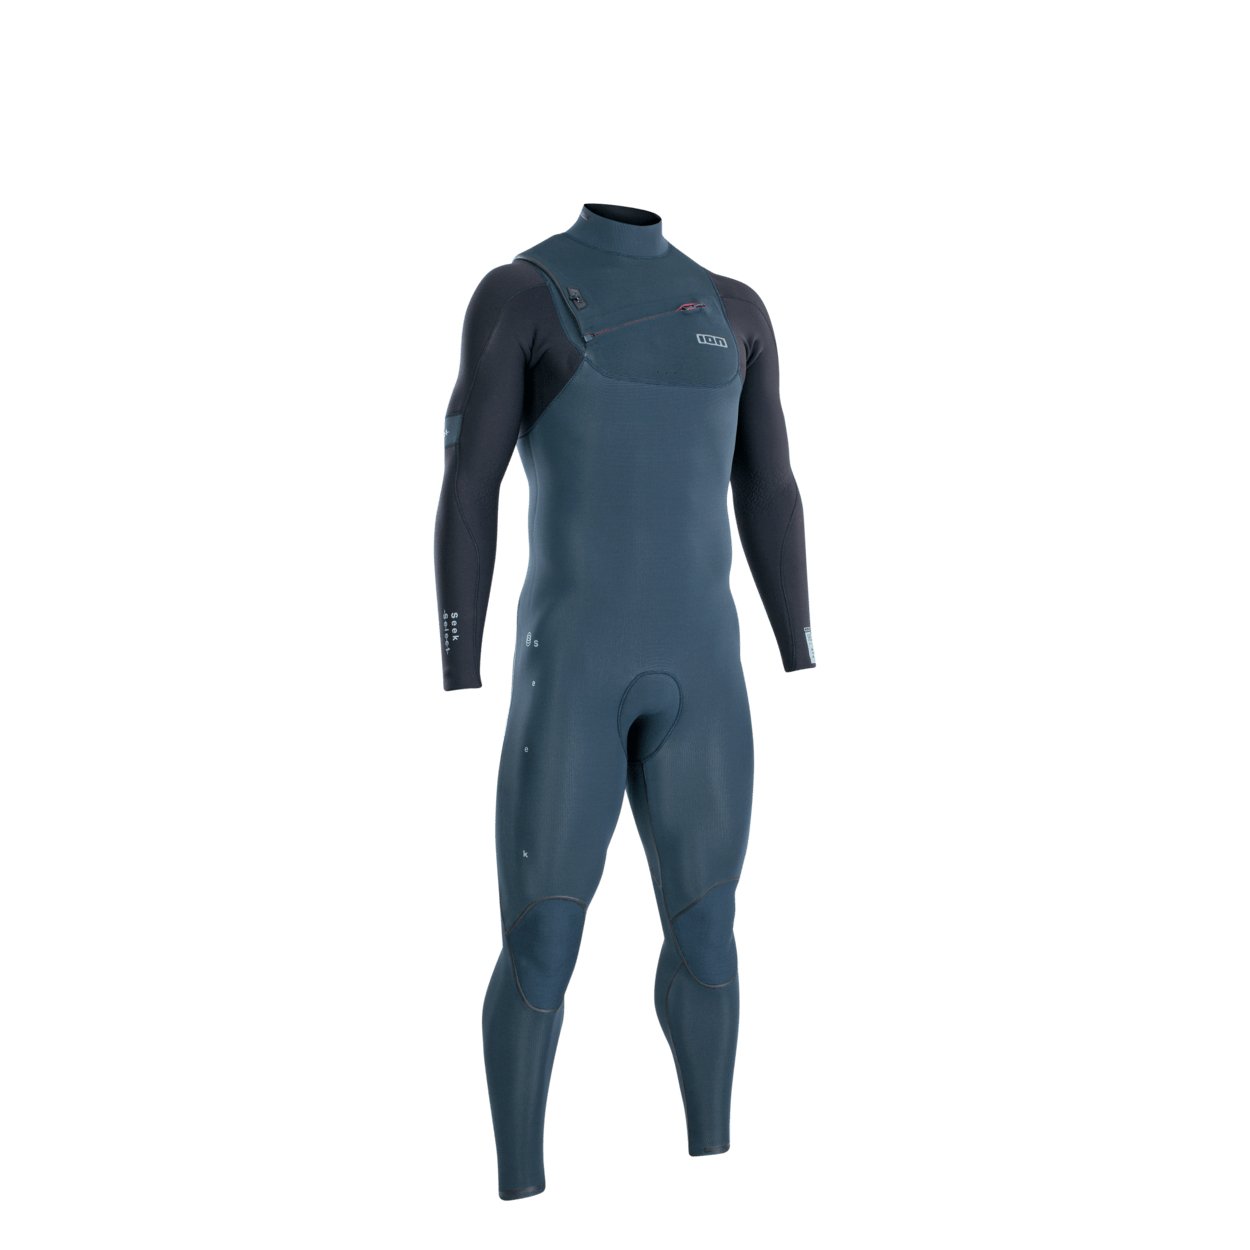 ION Seek Select 3/2 Front Zip 2022 - Worthing Watersports - 9010583062228 - Wetsuits - ION Water